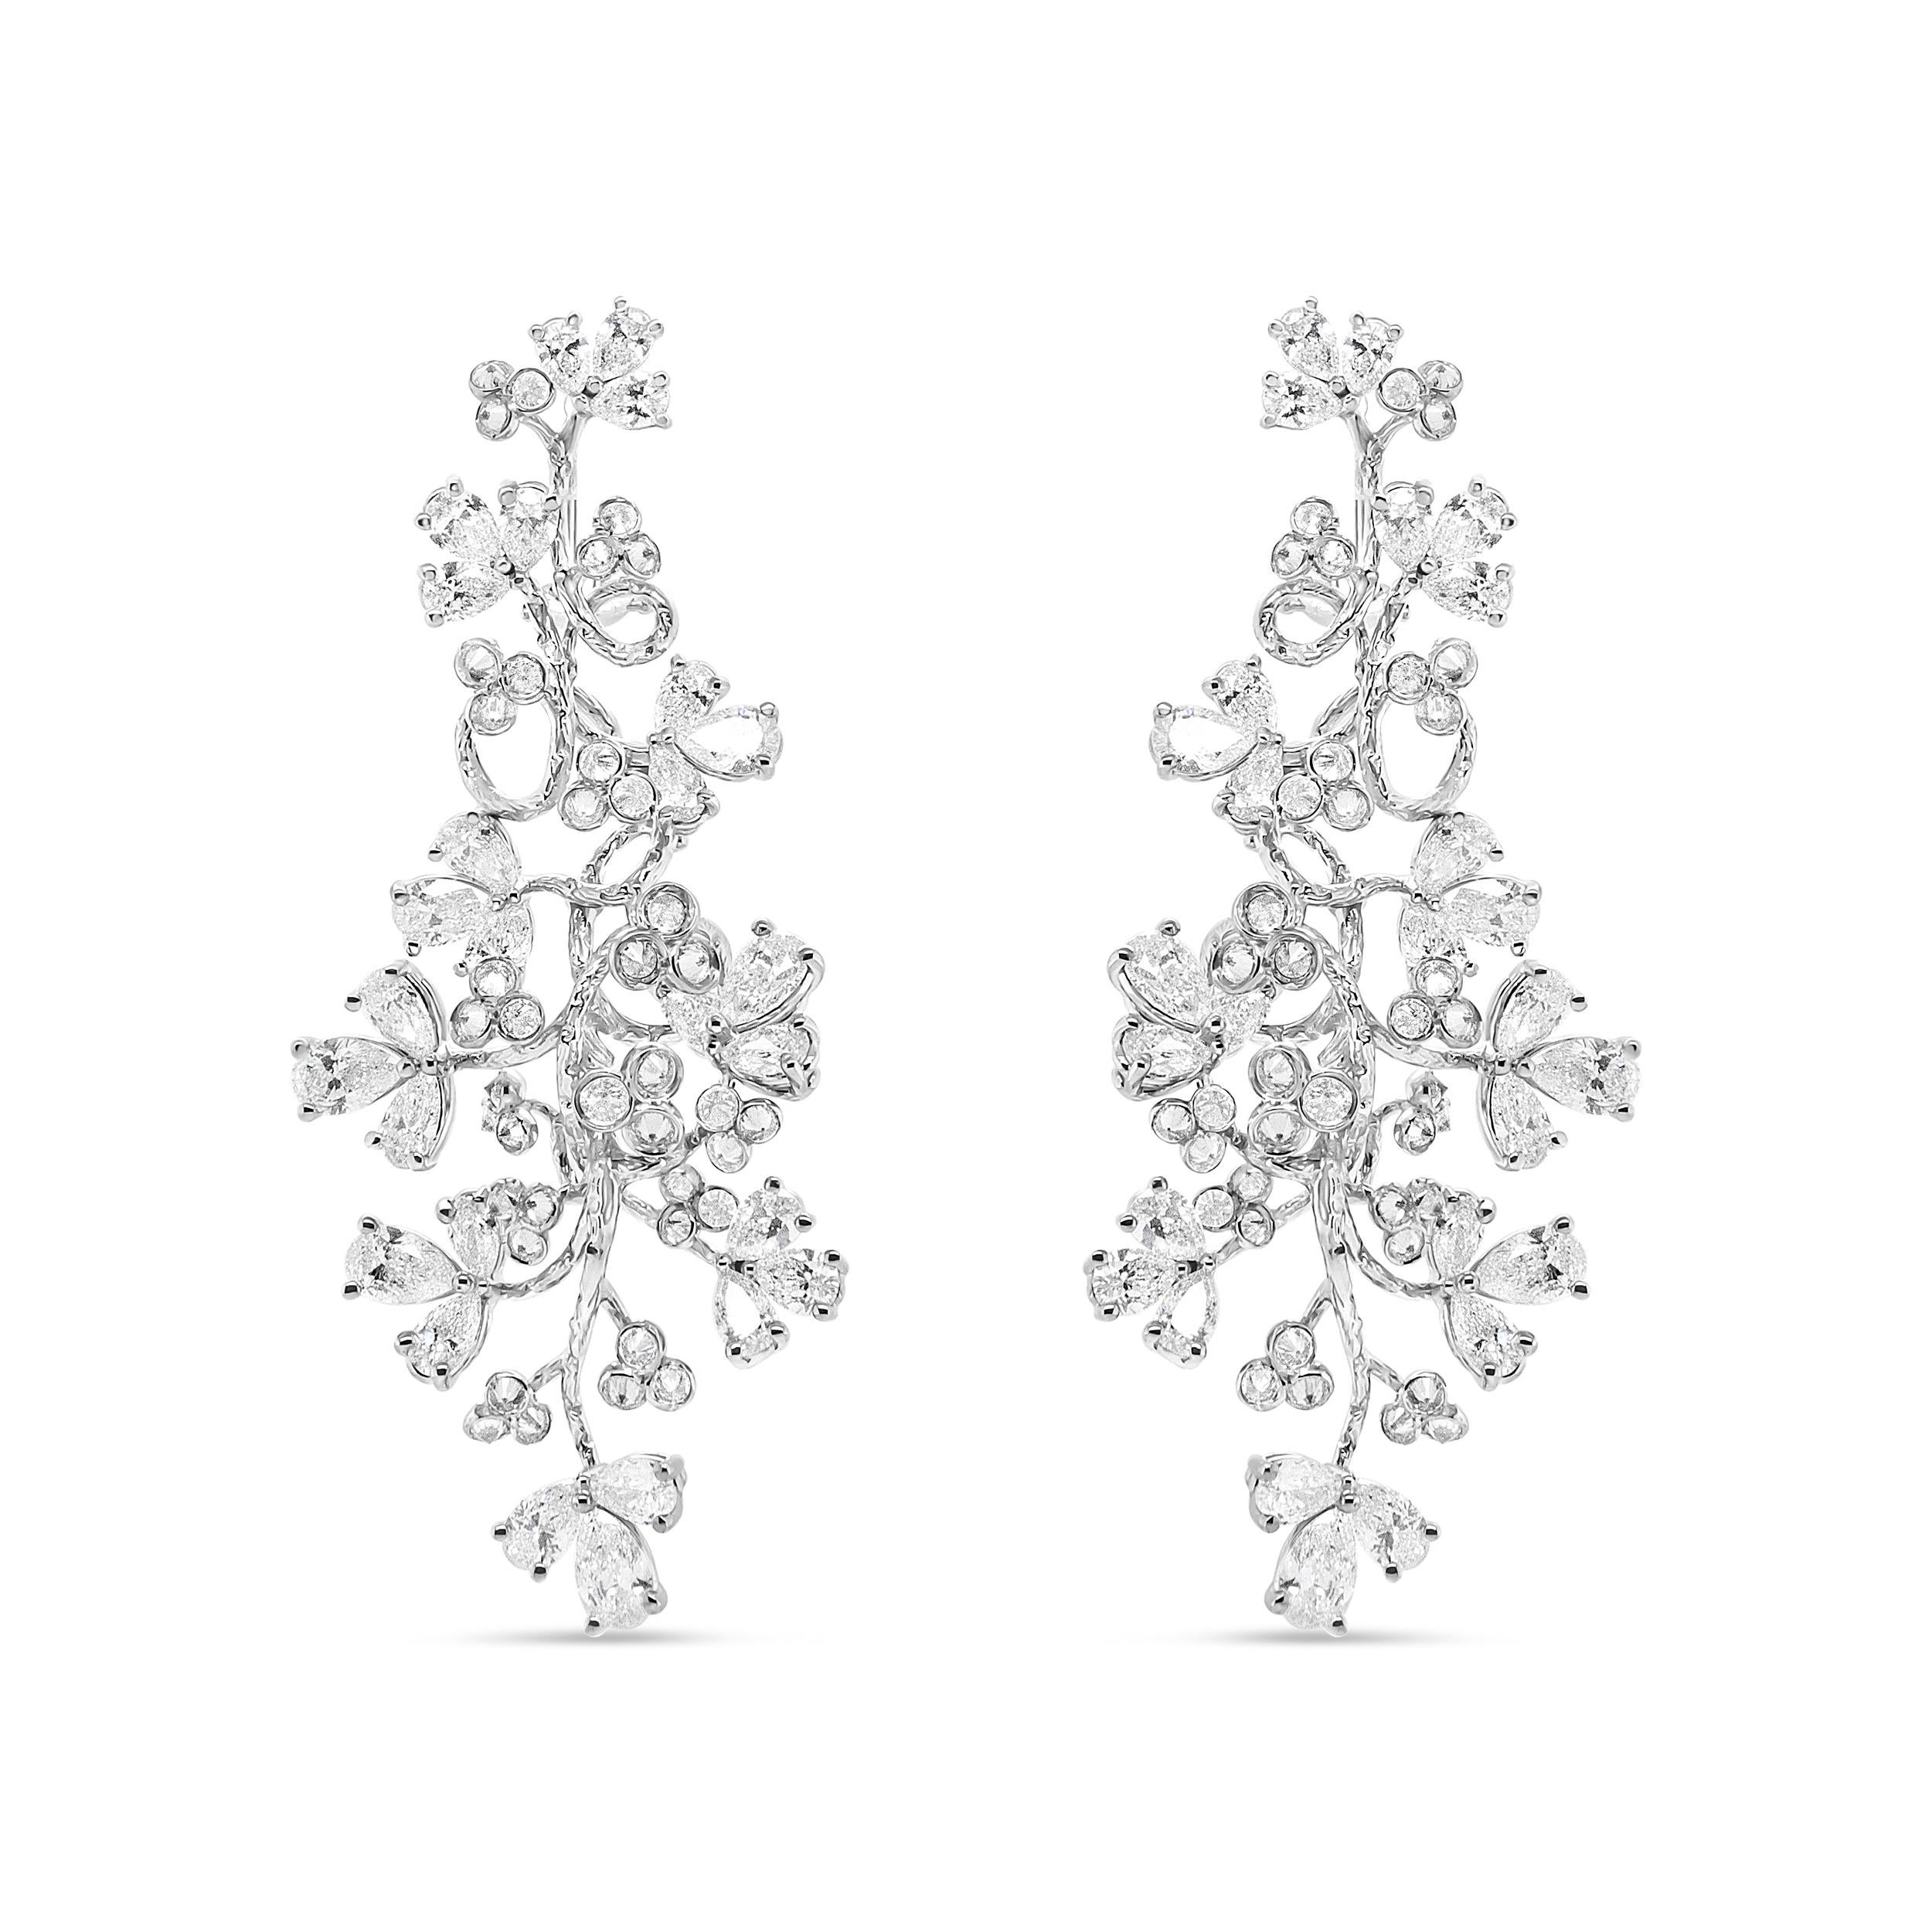 Alive with the wonder and magic of diamonds inspired by nature, this pair of 18k white gold floral motif earrings is an elegant stunner. The intricate design of these earrings beholds blooms of pear-shaped diamonds in 3 prong settings met with round